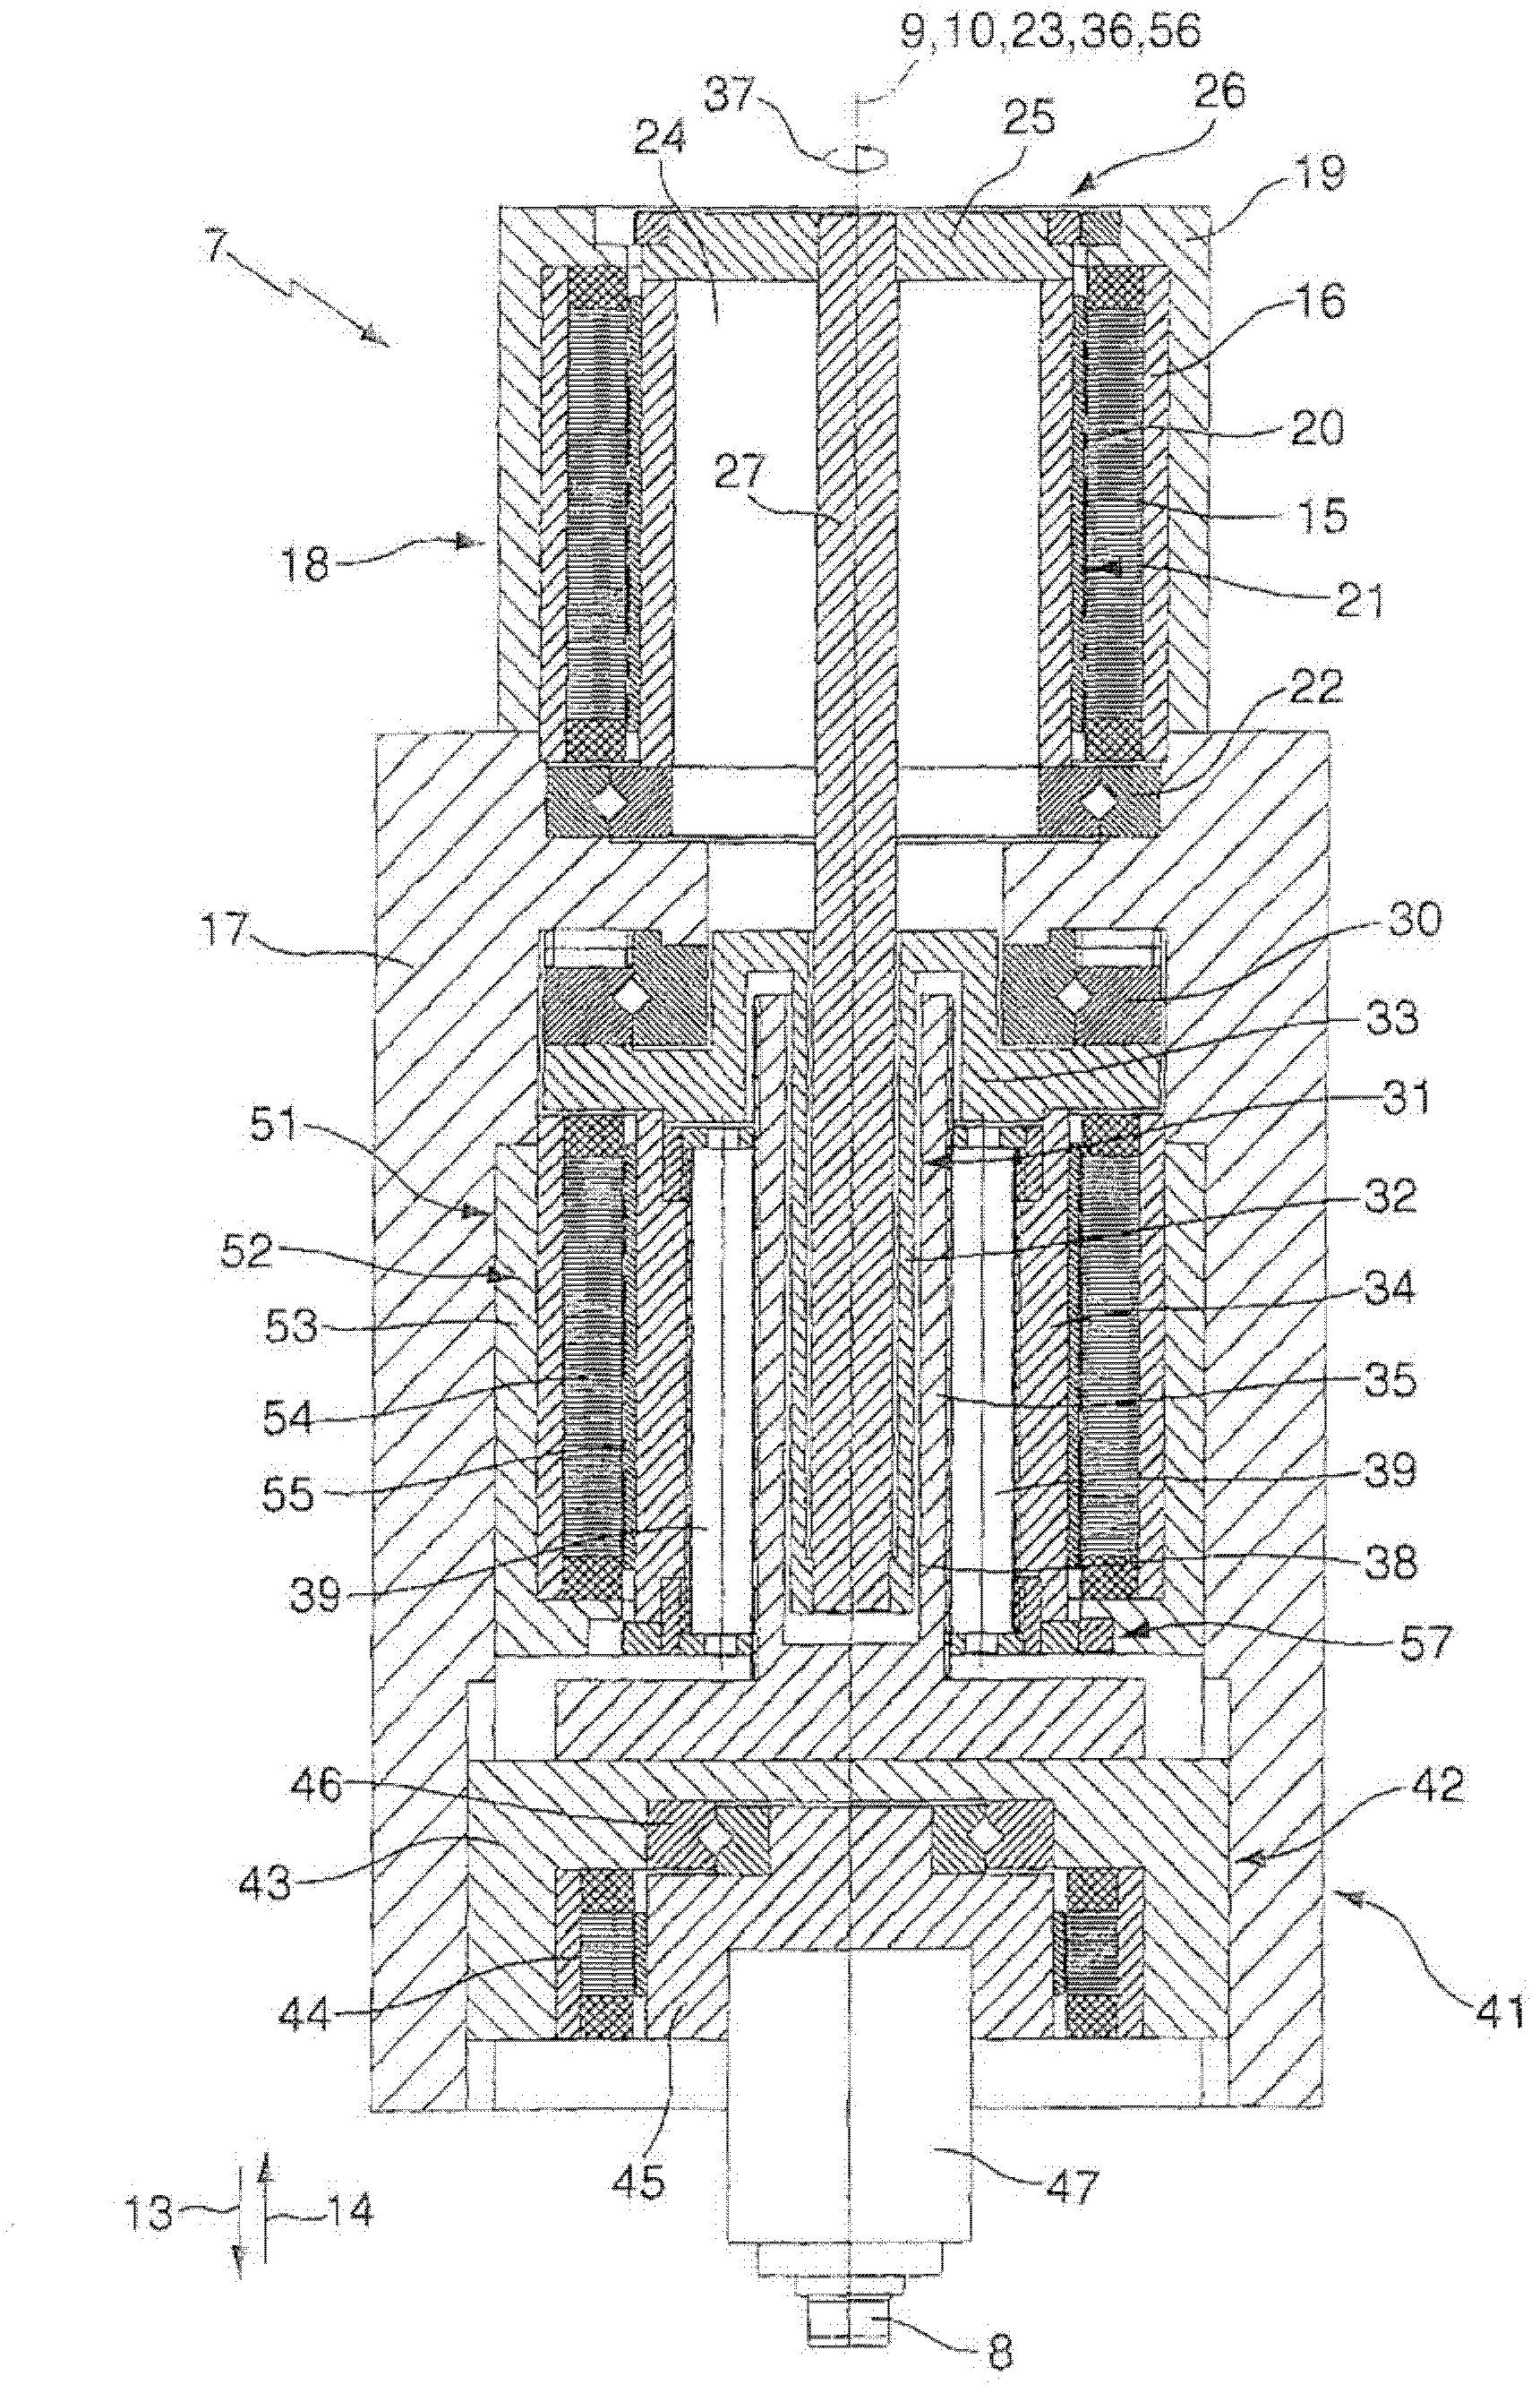 Press drive and method for generating a stroke motion of a tool mounting by means of a press drive